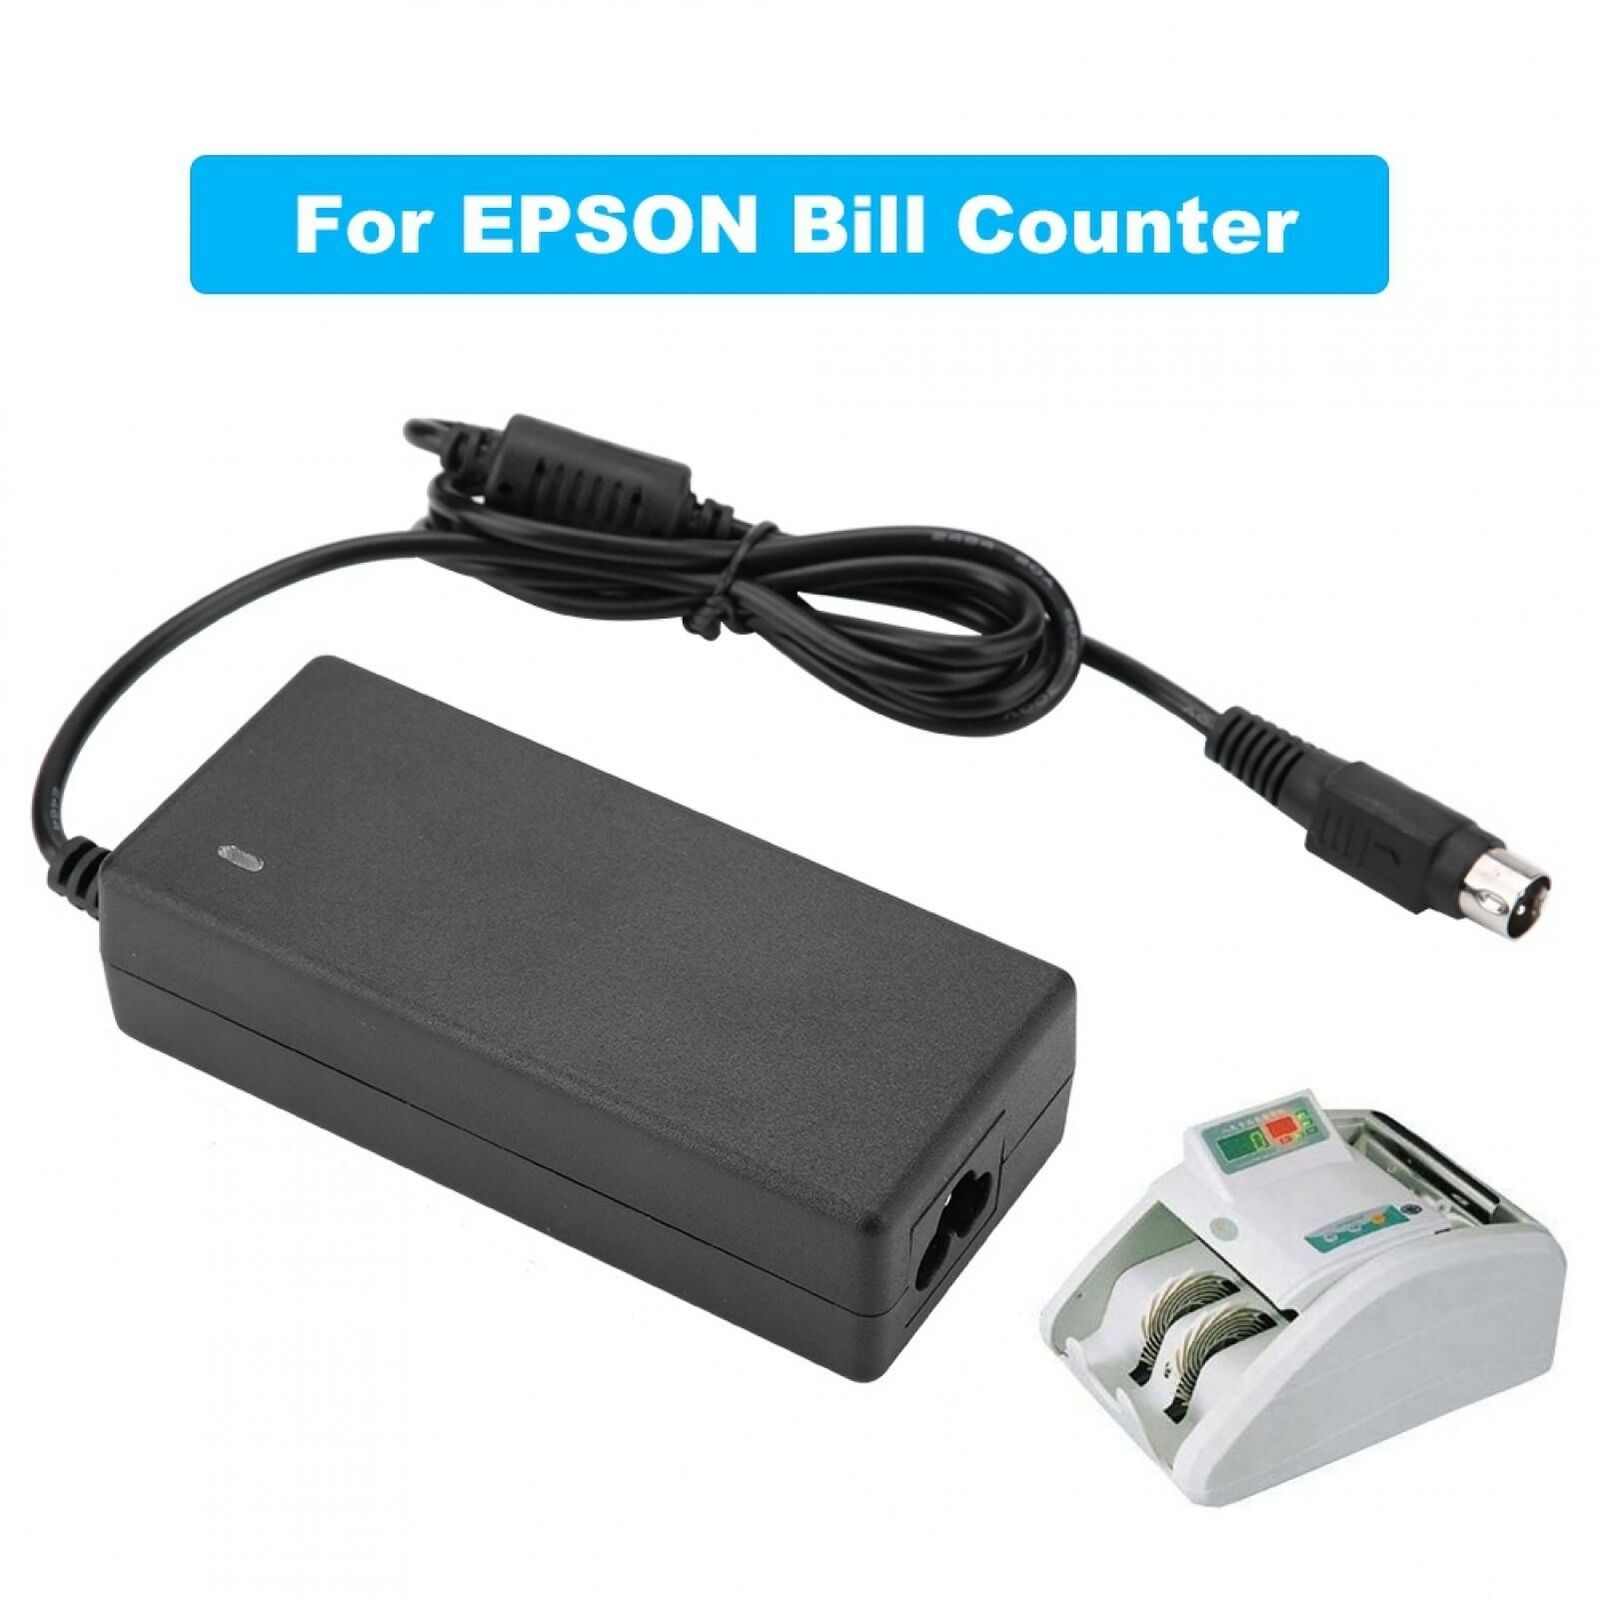 Ac Dc Adapter Power Adapter Power Supply For Bill Counter Receipt Printer Ac Dc Adapter Power Adapter Power Supply For